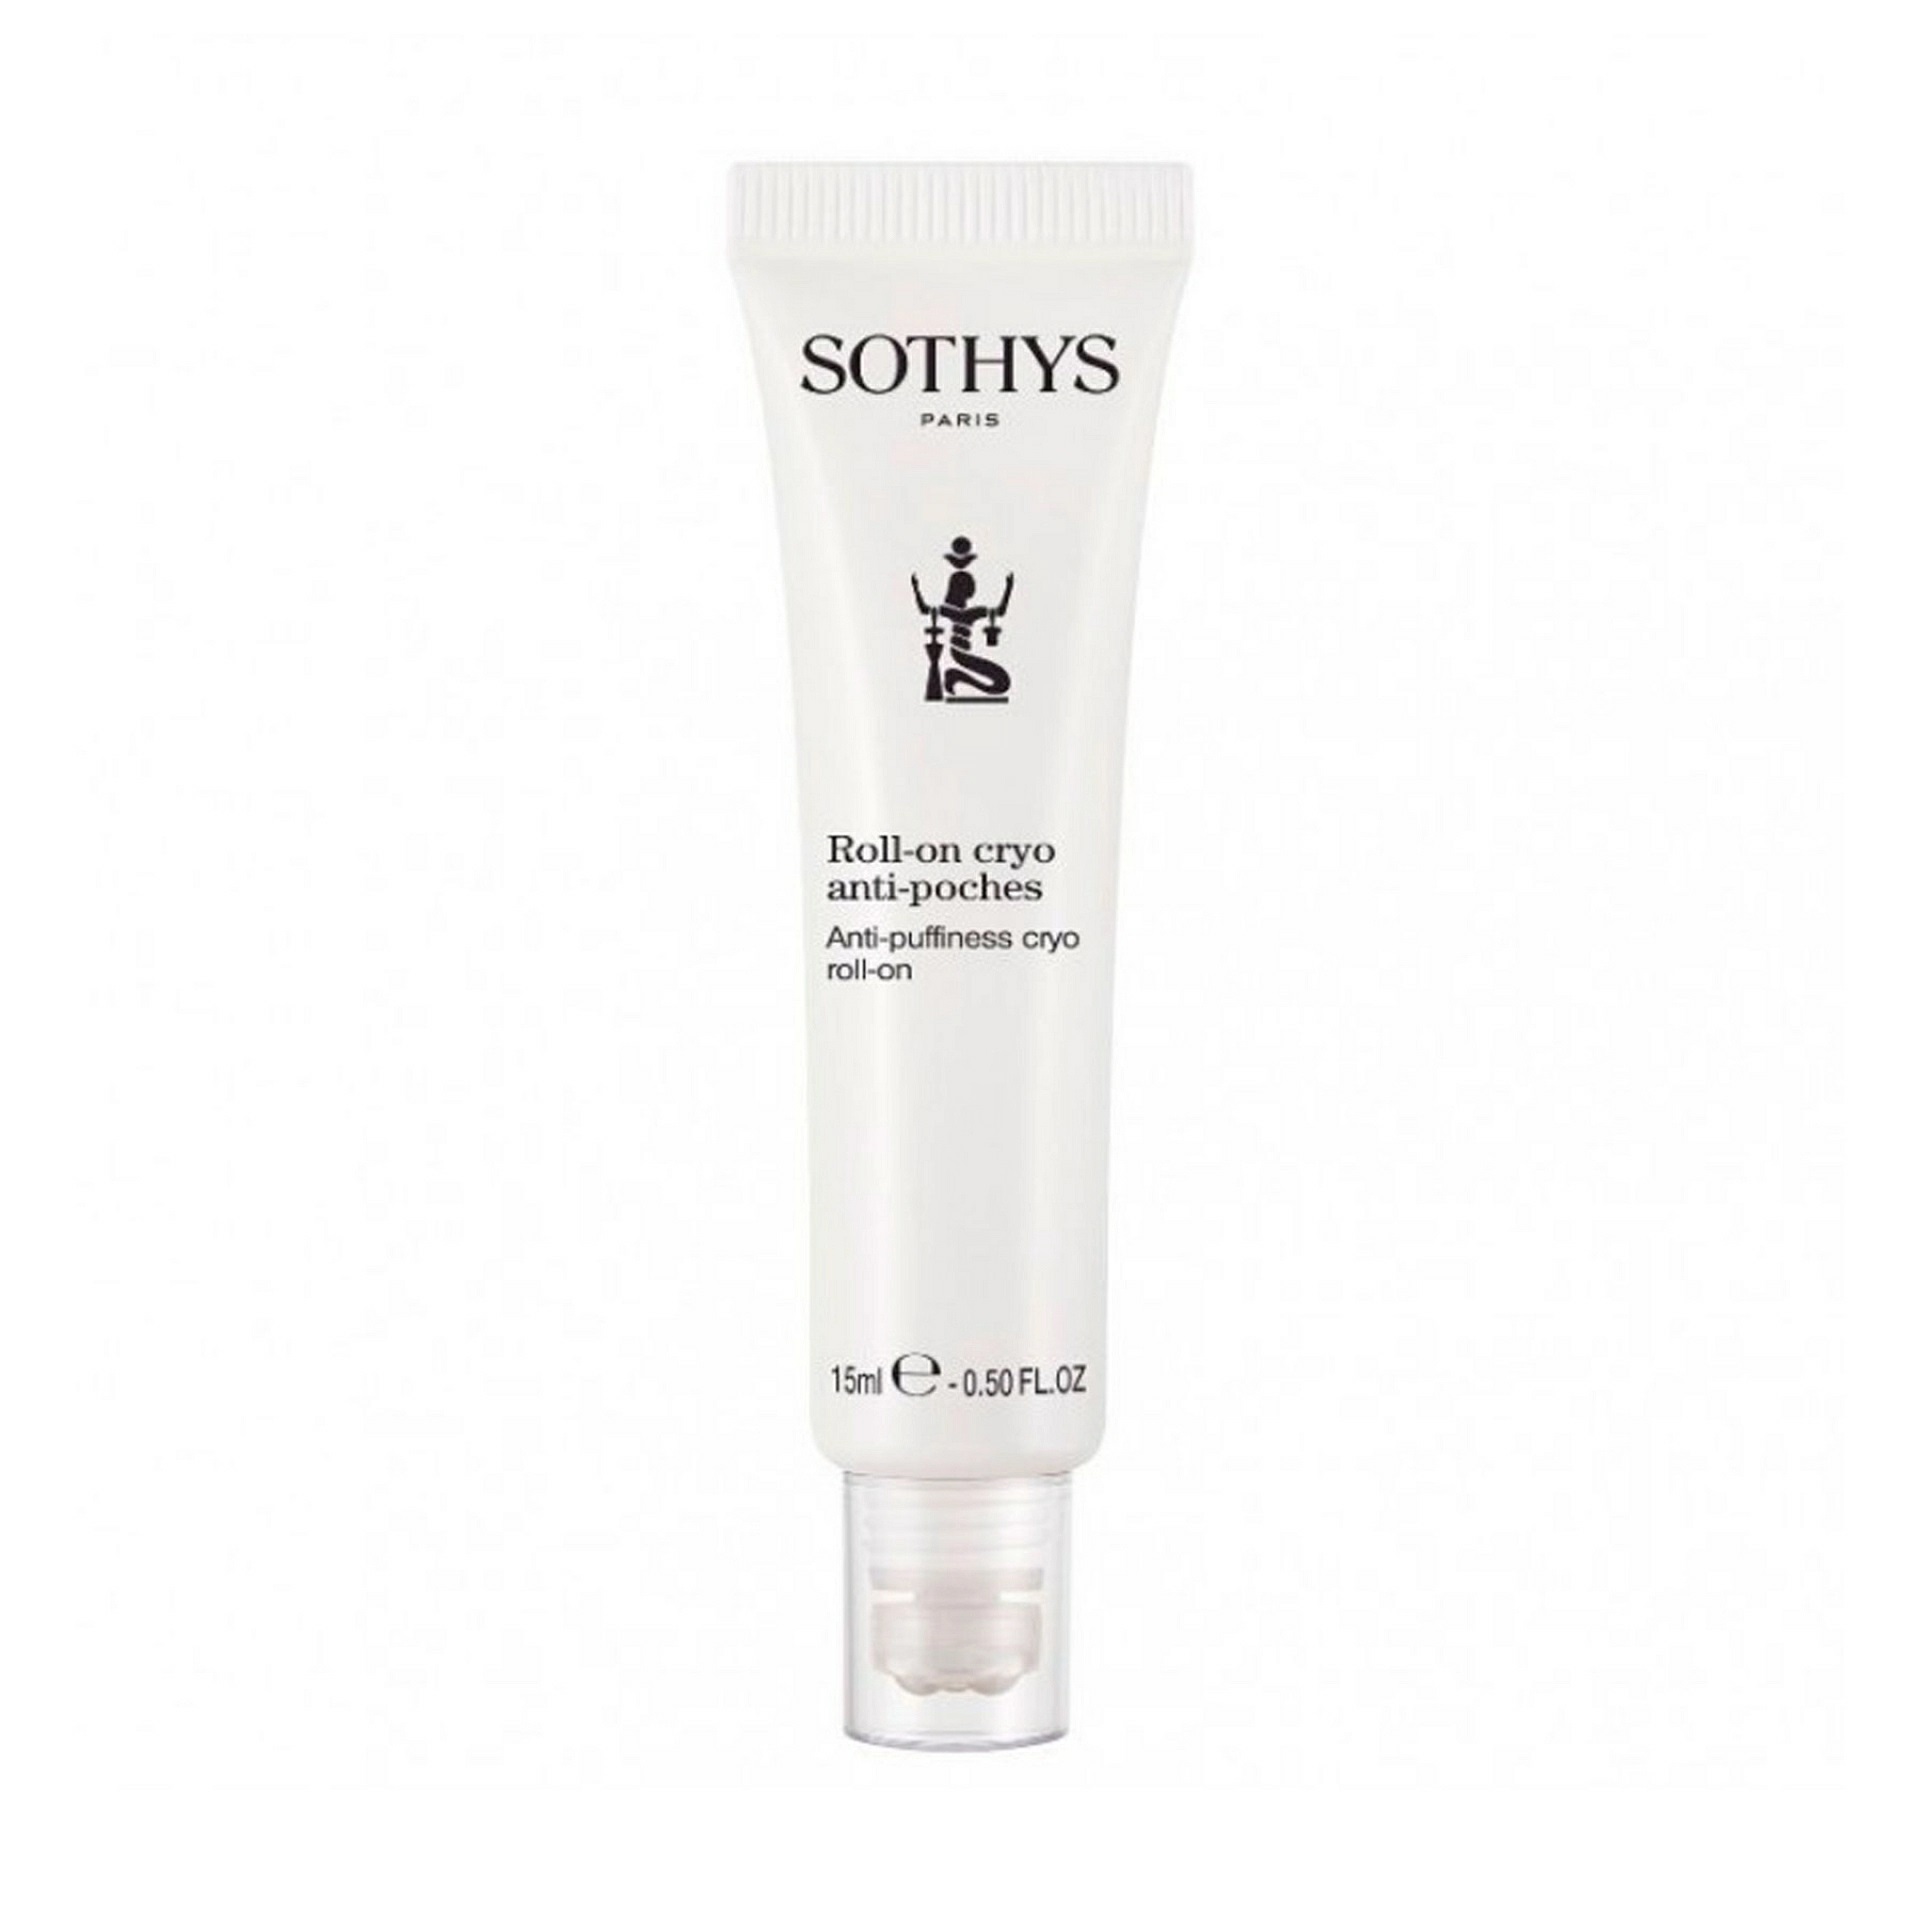 SOTHYS Paris Oční roll-on (Anti-Puffiness Cryo Roll-On) 15 ml